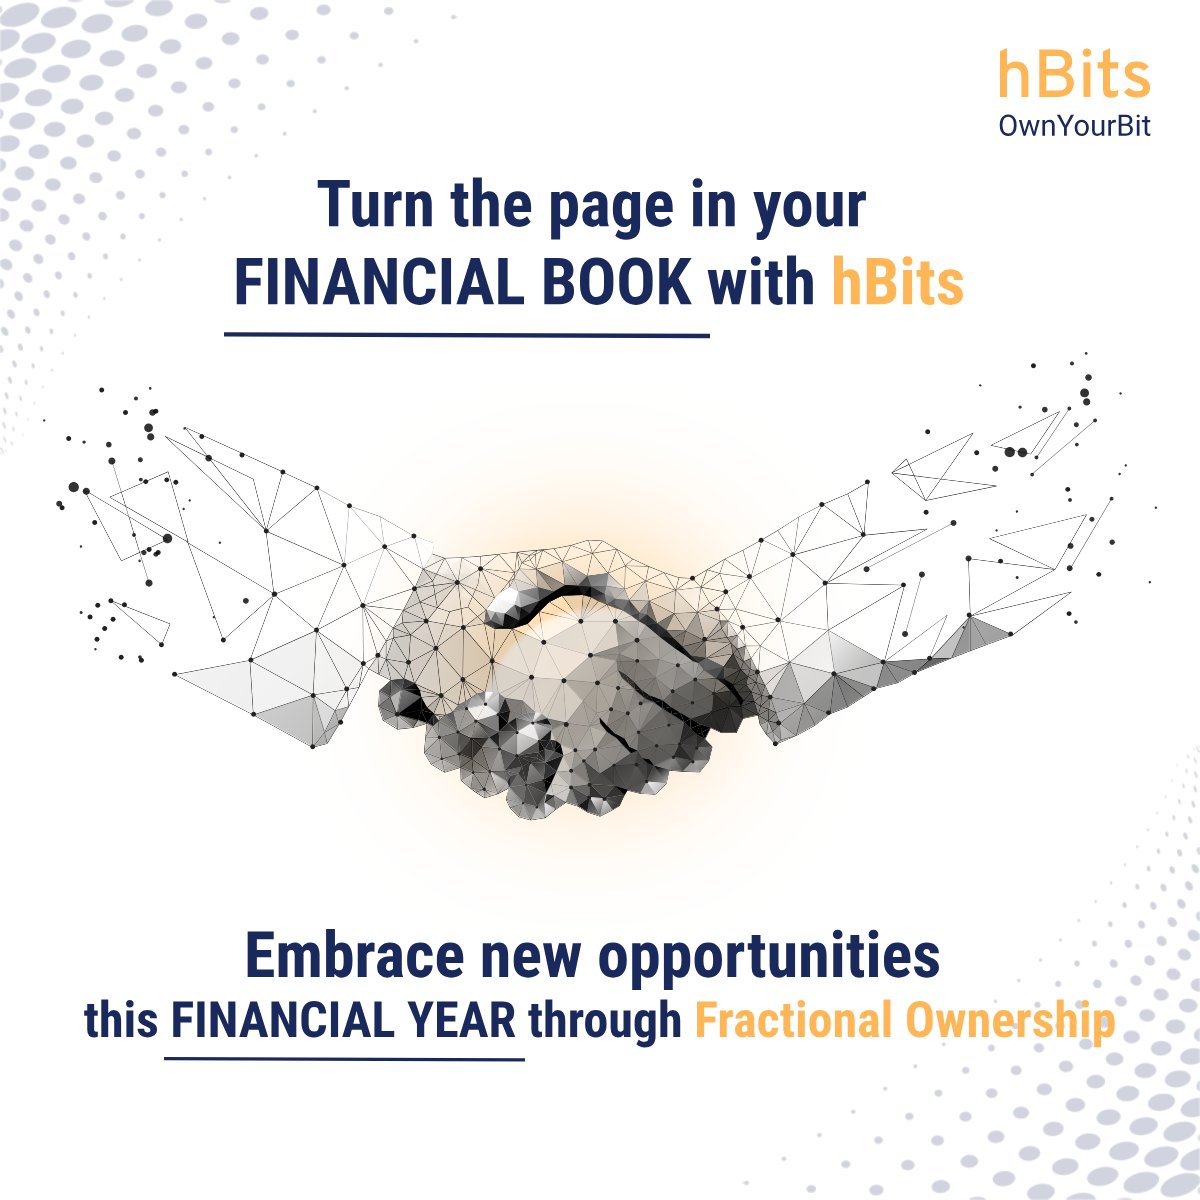 Happy Financial Year!✨💸 Wishing you financial growth and success as we begin the financial year 2024-25.📈 #hBits #ownyourbit #RealEstateInvestment #FractionalOwnership #Investment #WealthCreation #Growth #GrowYourMoney #Property #FinancialFreedom #NewBeginnings